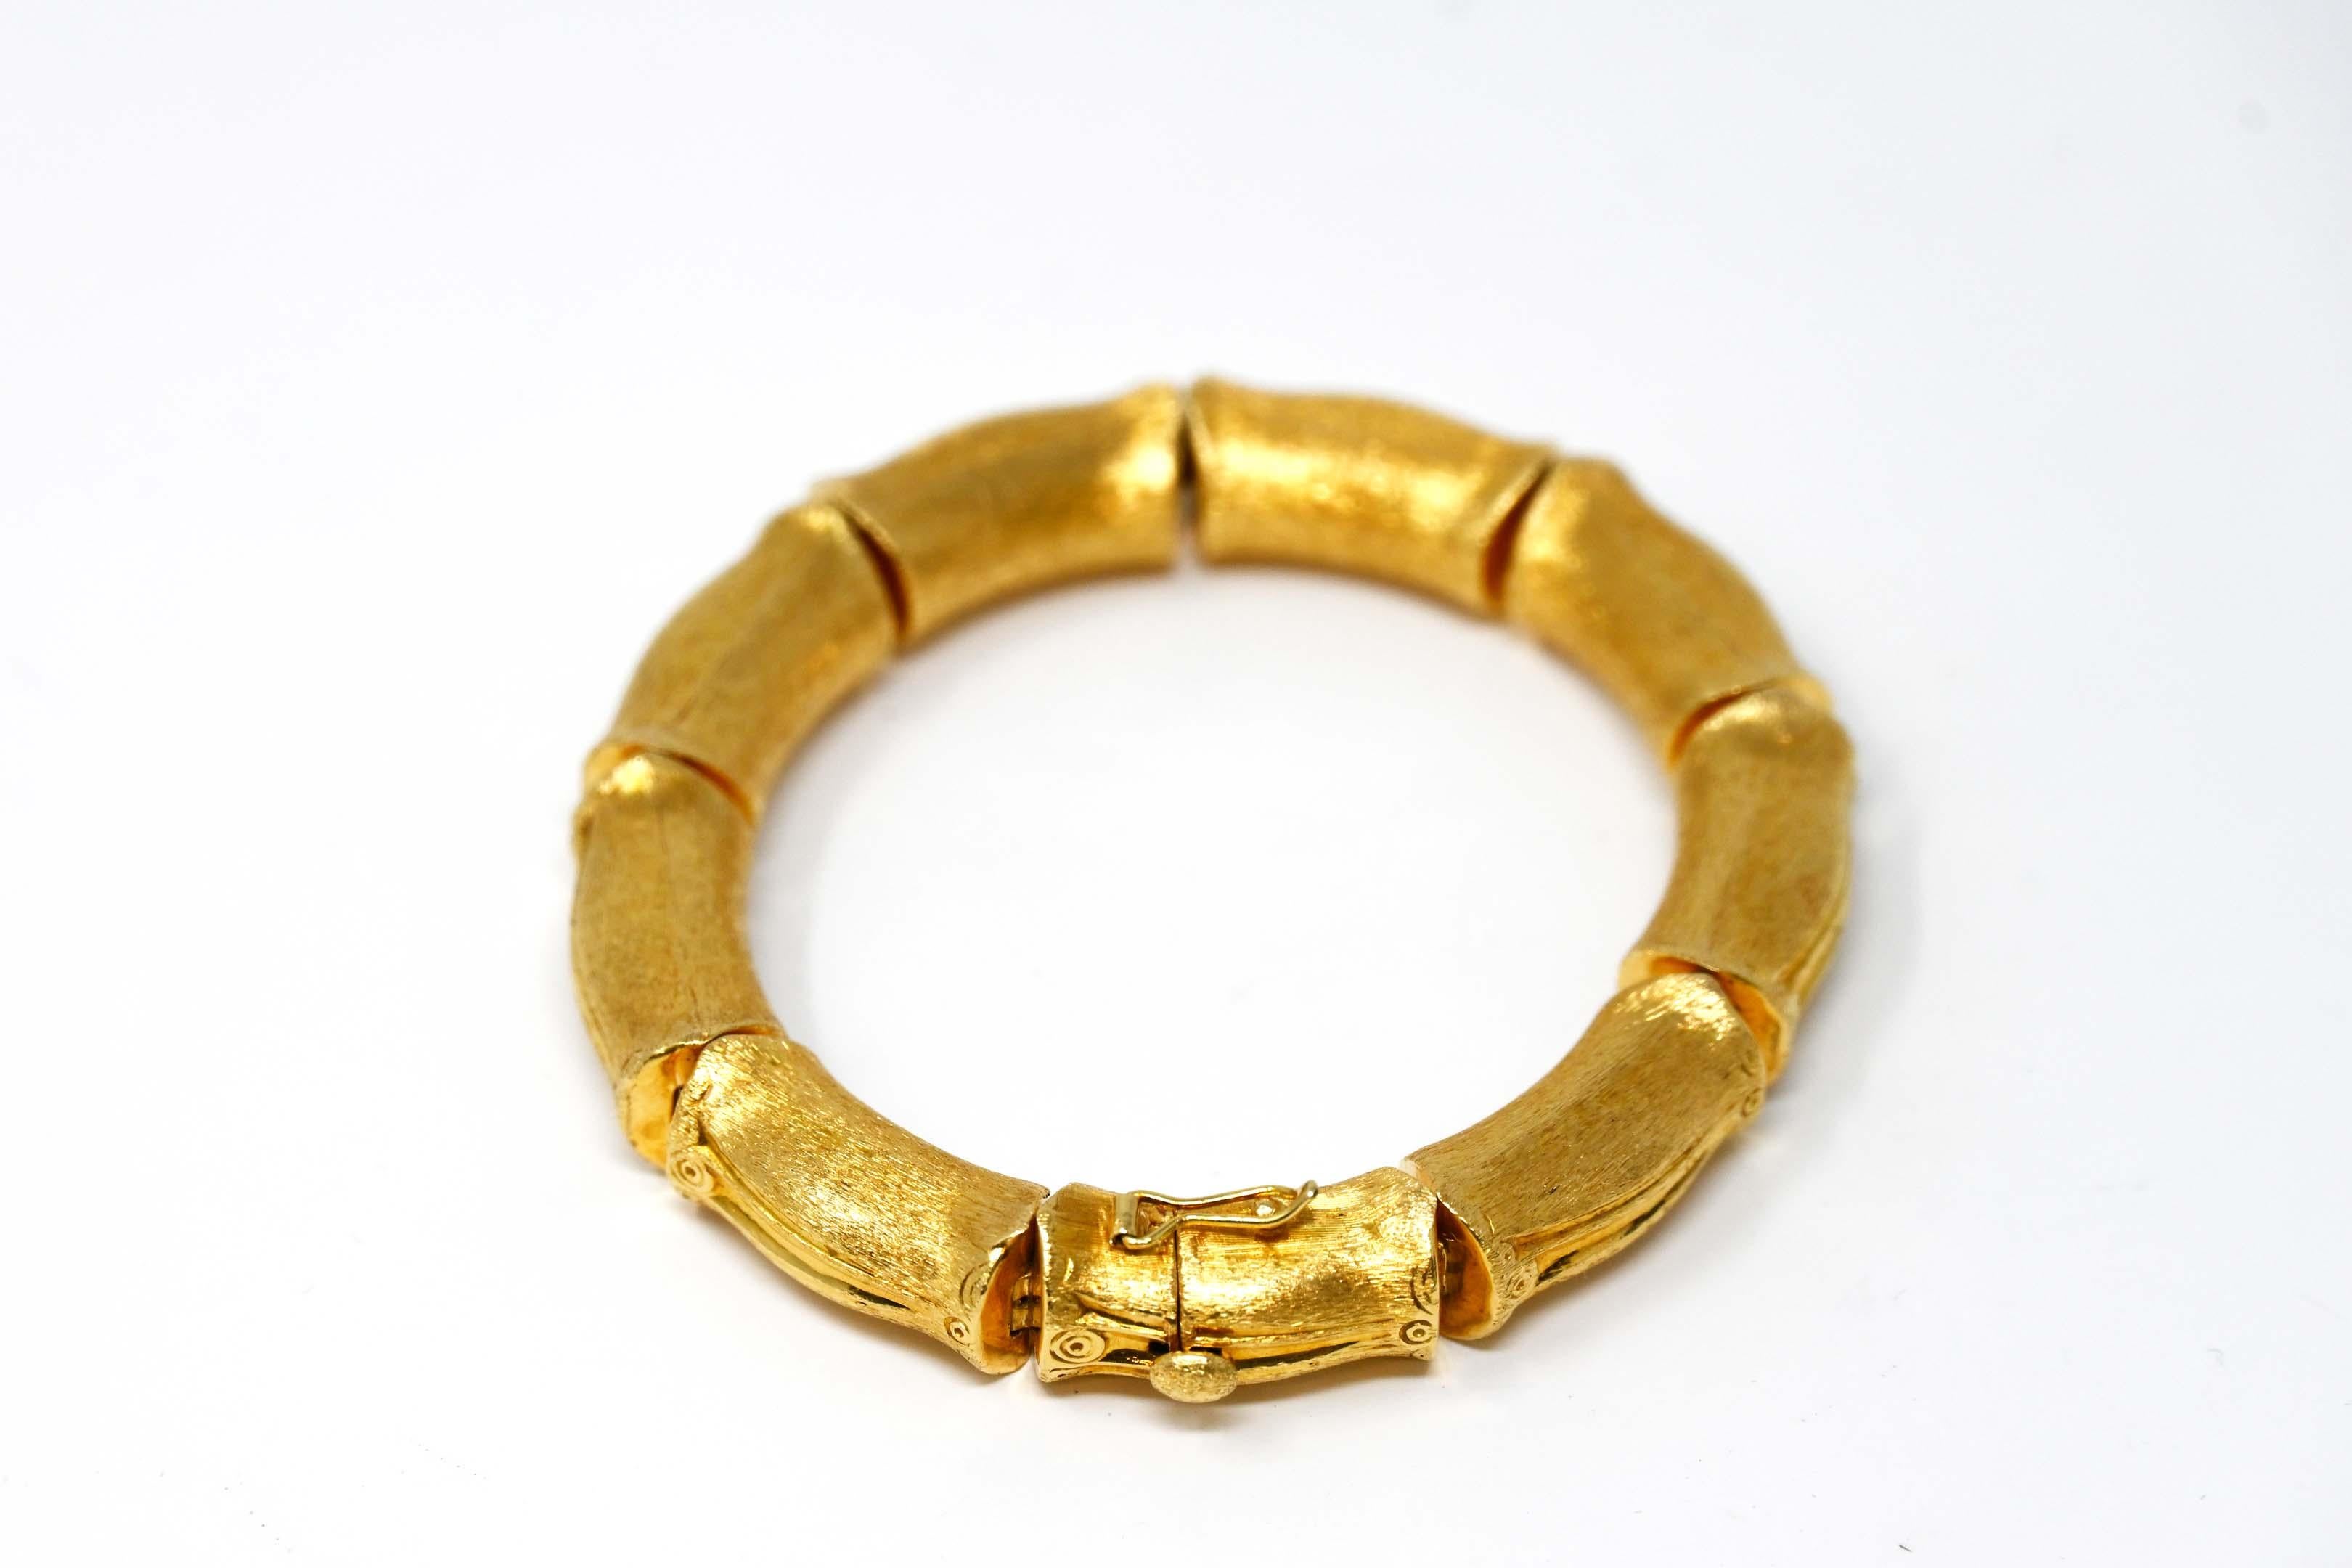 Authentic 18k yellow gold bracelet made by Ruth Satsky, an American famous designer. The bracelet is marked Satsky 18k, Italy. The item measures 8 1/4 inches long and weighs 34.2 grams and comes in excellent condition.